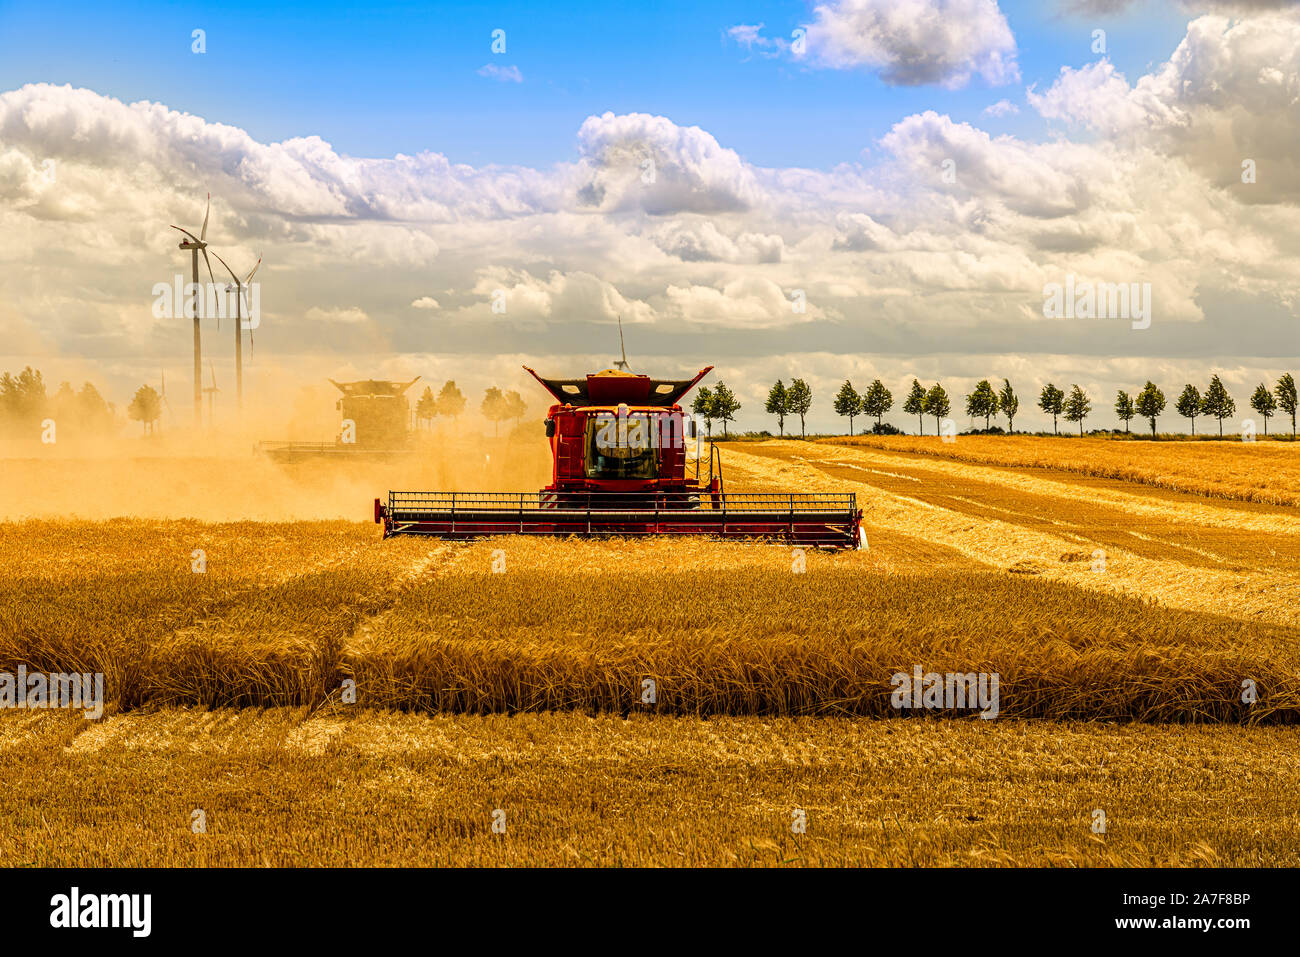 Large combine harvester mowing a cereal field Stock Photo